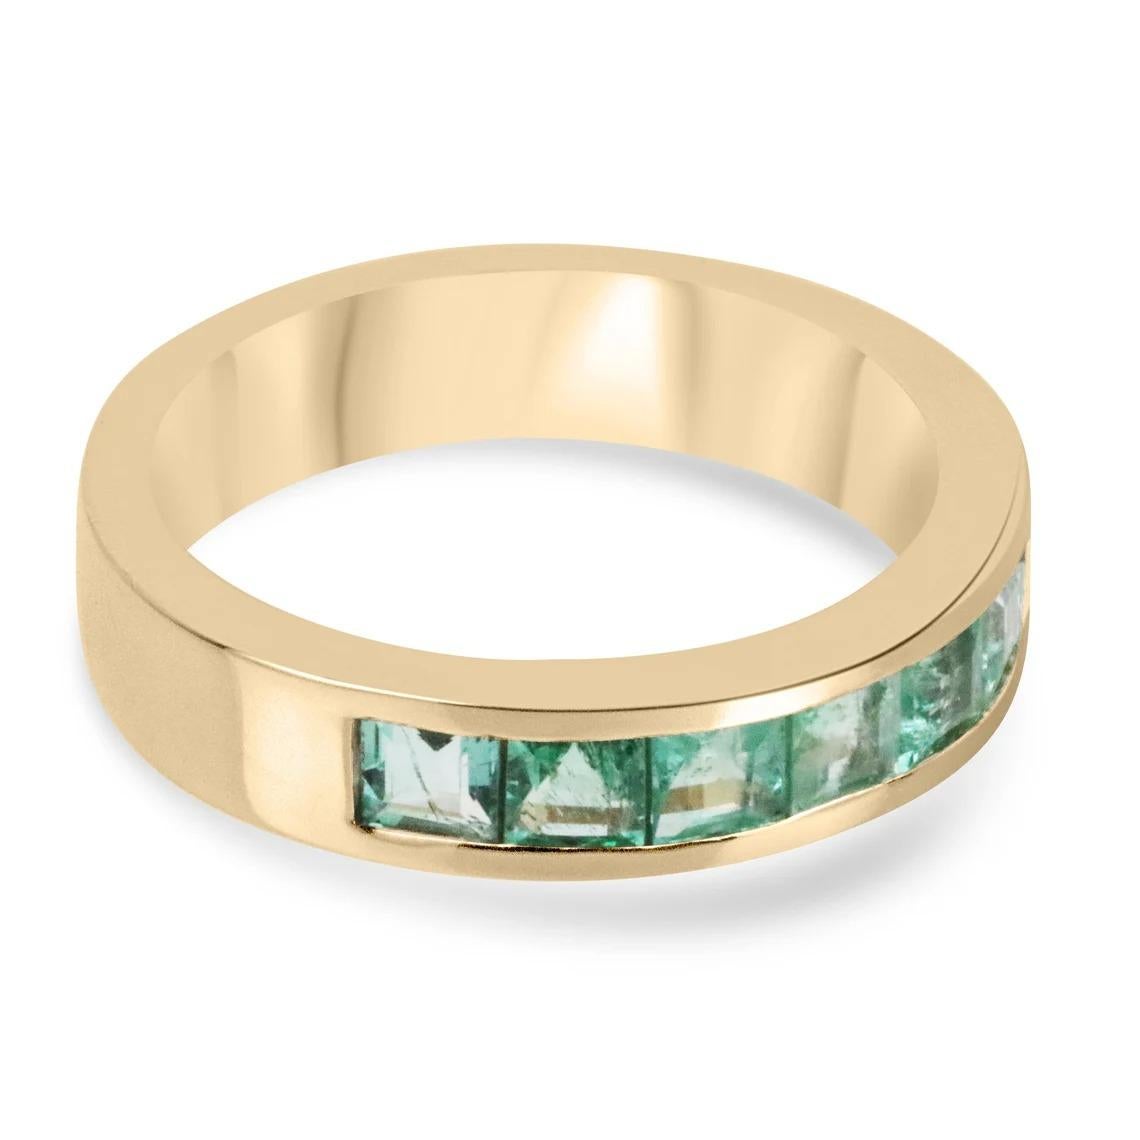 Showcased is a handcrafted Princess cut genuine emerald wedding band 14k. Handcrafted by our own master jeweler, this ring features a row of seven-channel set princess cut emeralds. Each natural gemstone has been hand-selected meticulously to ensure